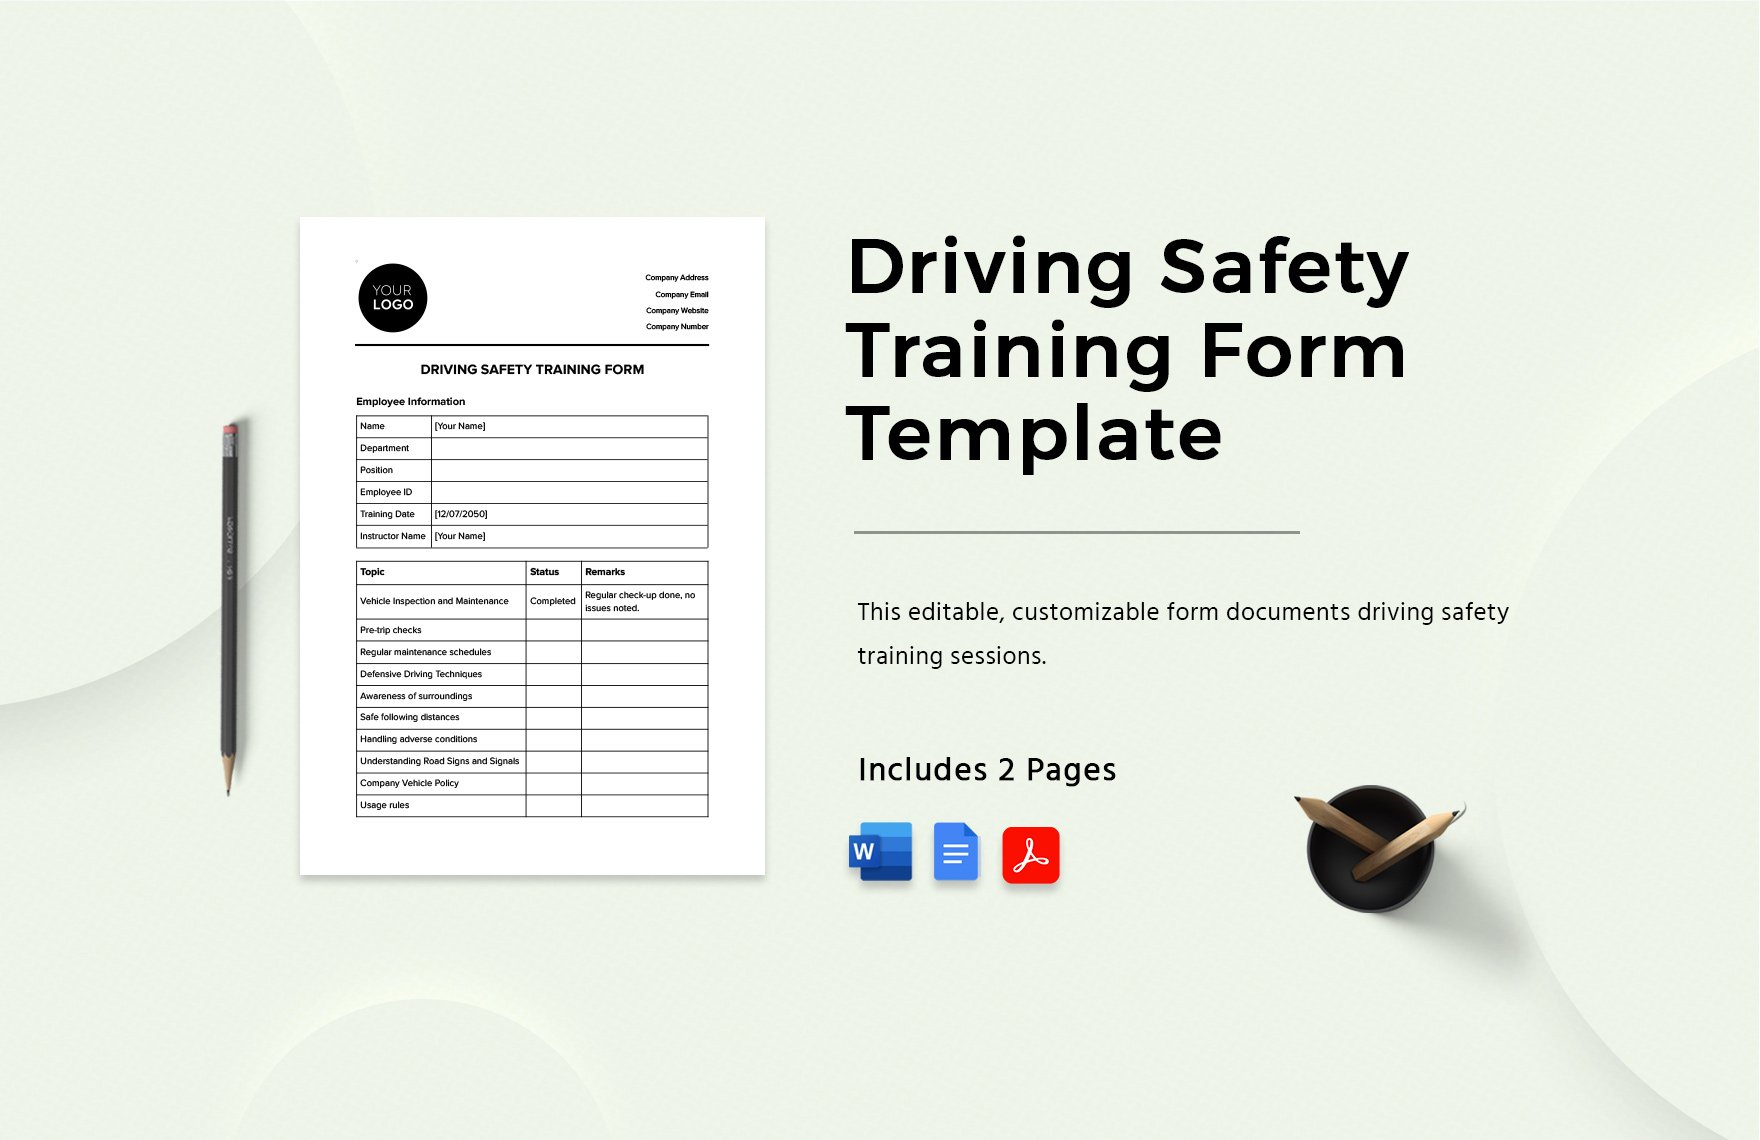 Driving Safety Training Form Template